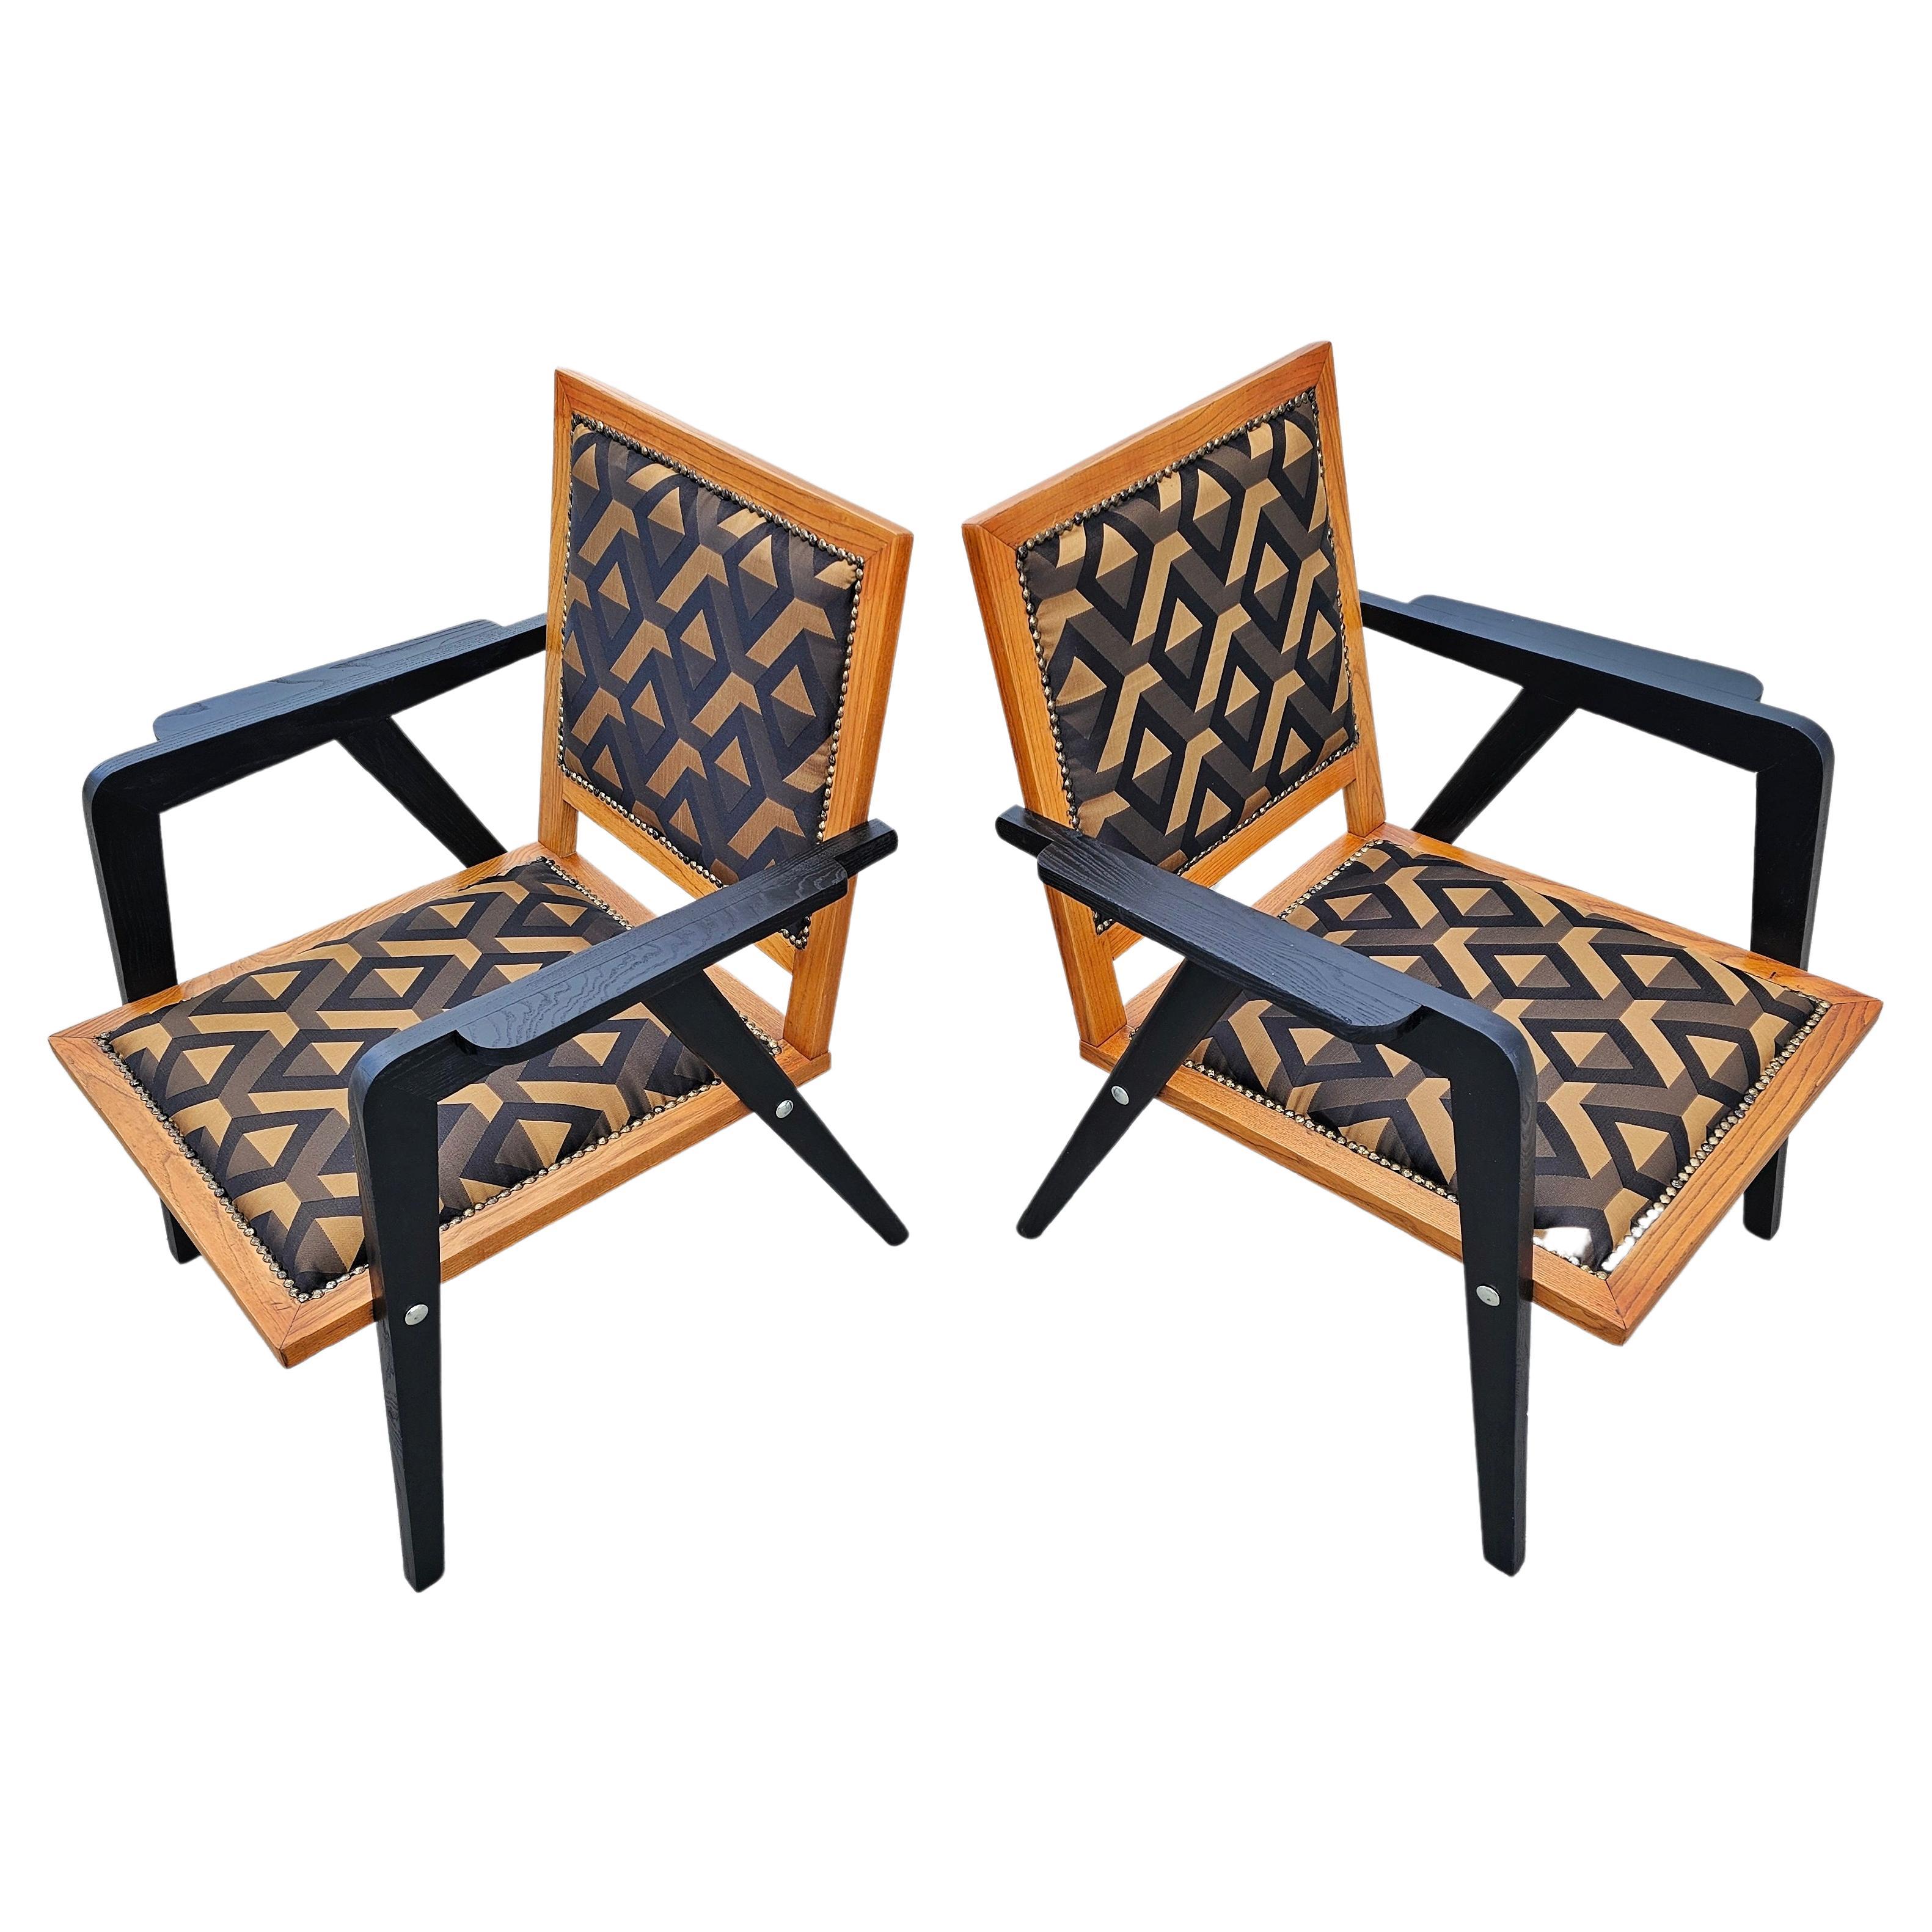 Pair of Rare Mid-Century Modern Armchairs, Fully Refurbished, Yugoslavia, 1950s For Sale